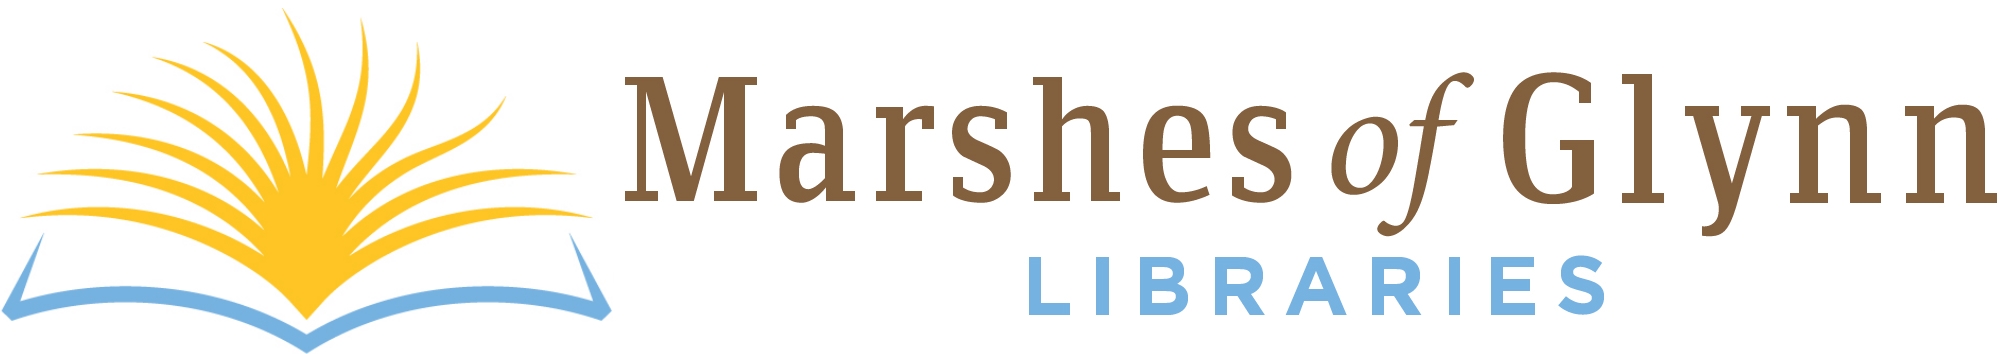 Marshes of Glynn Libraries logo